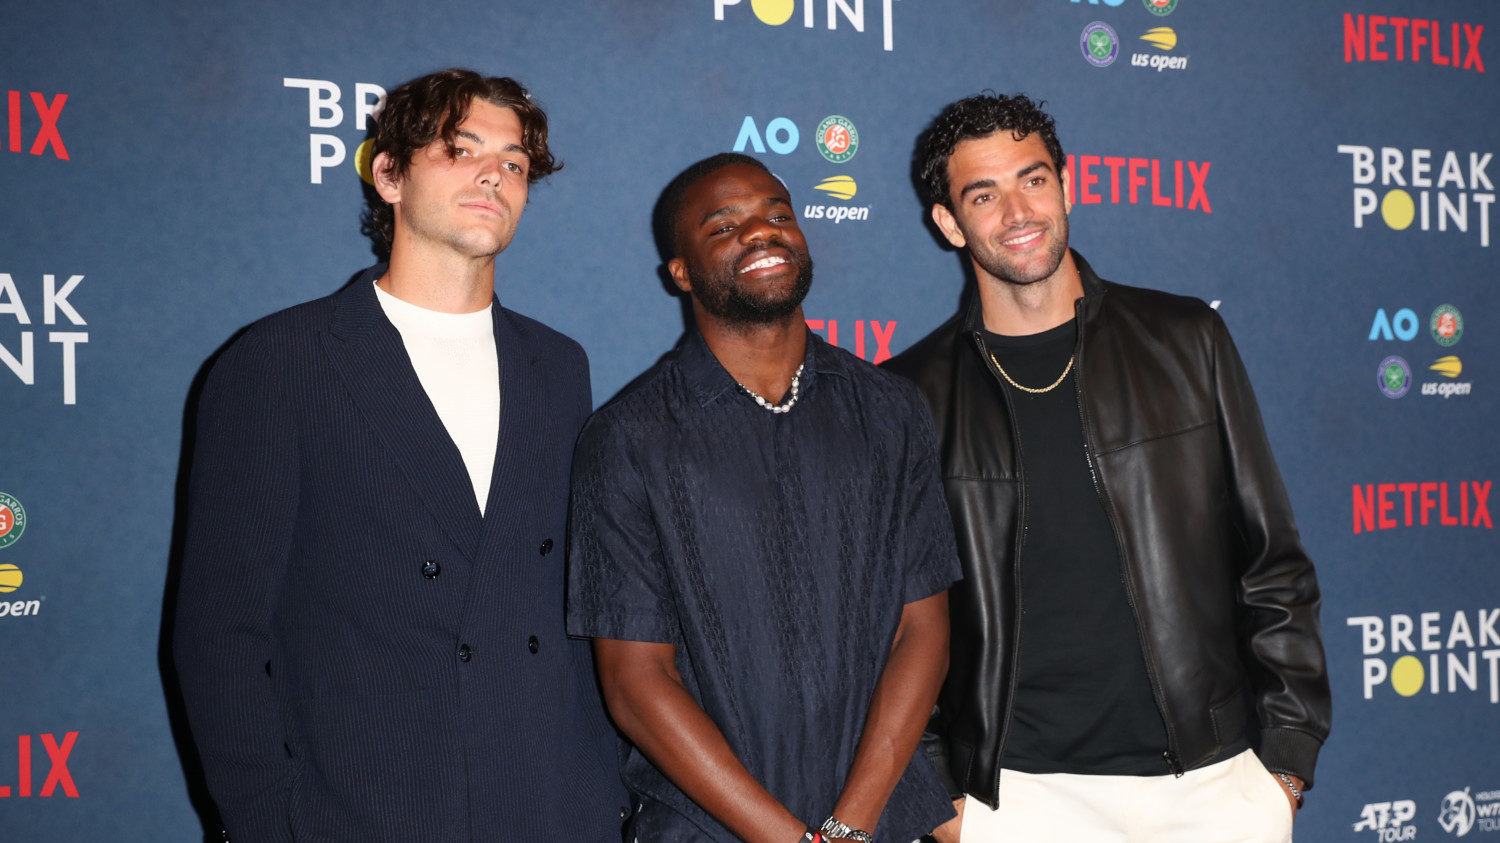 Tennis fans claim 'Netflix curse' is real after all 10 players from Break  Point crash out